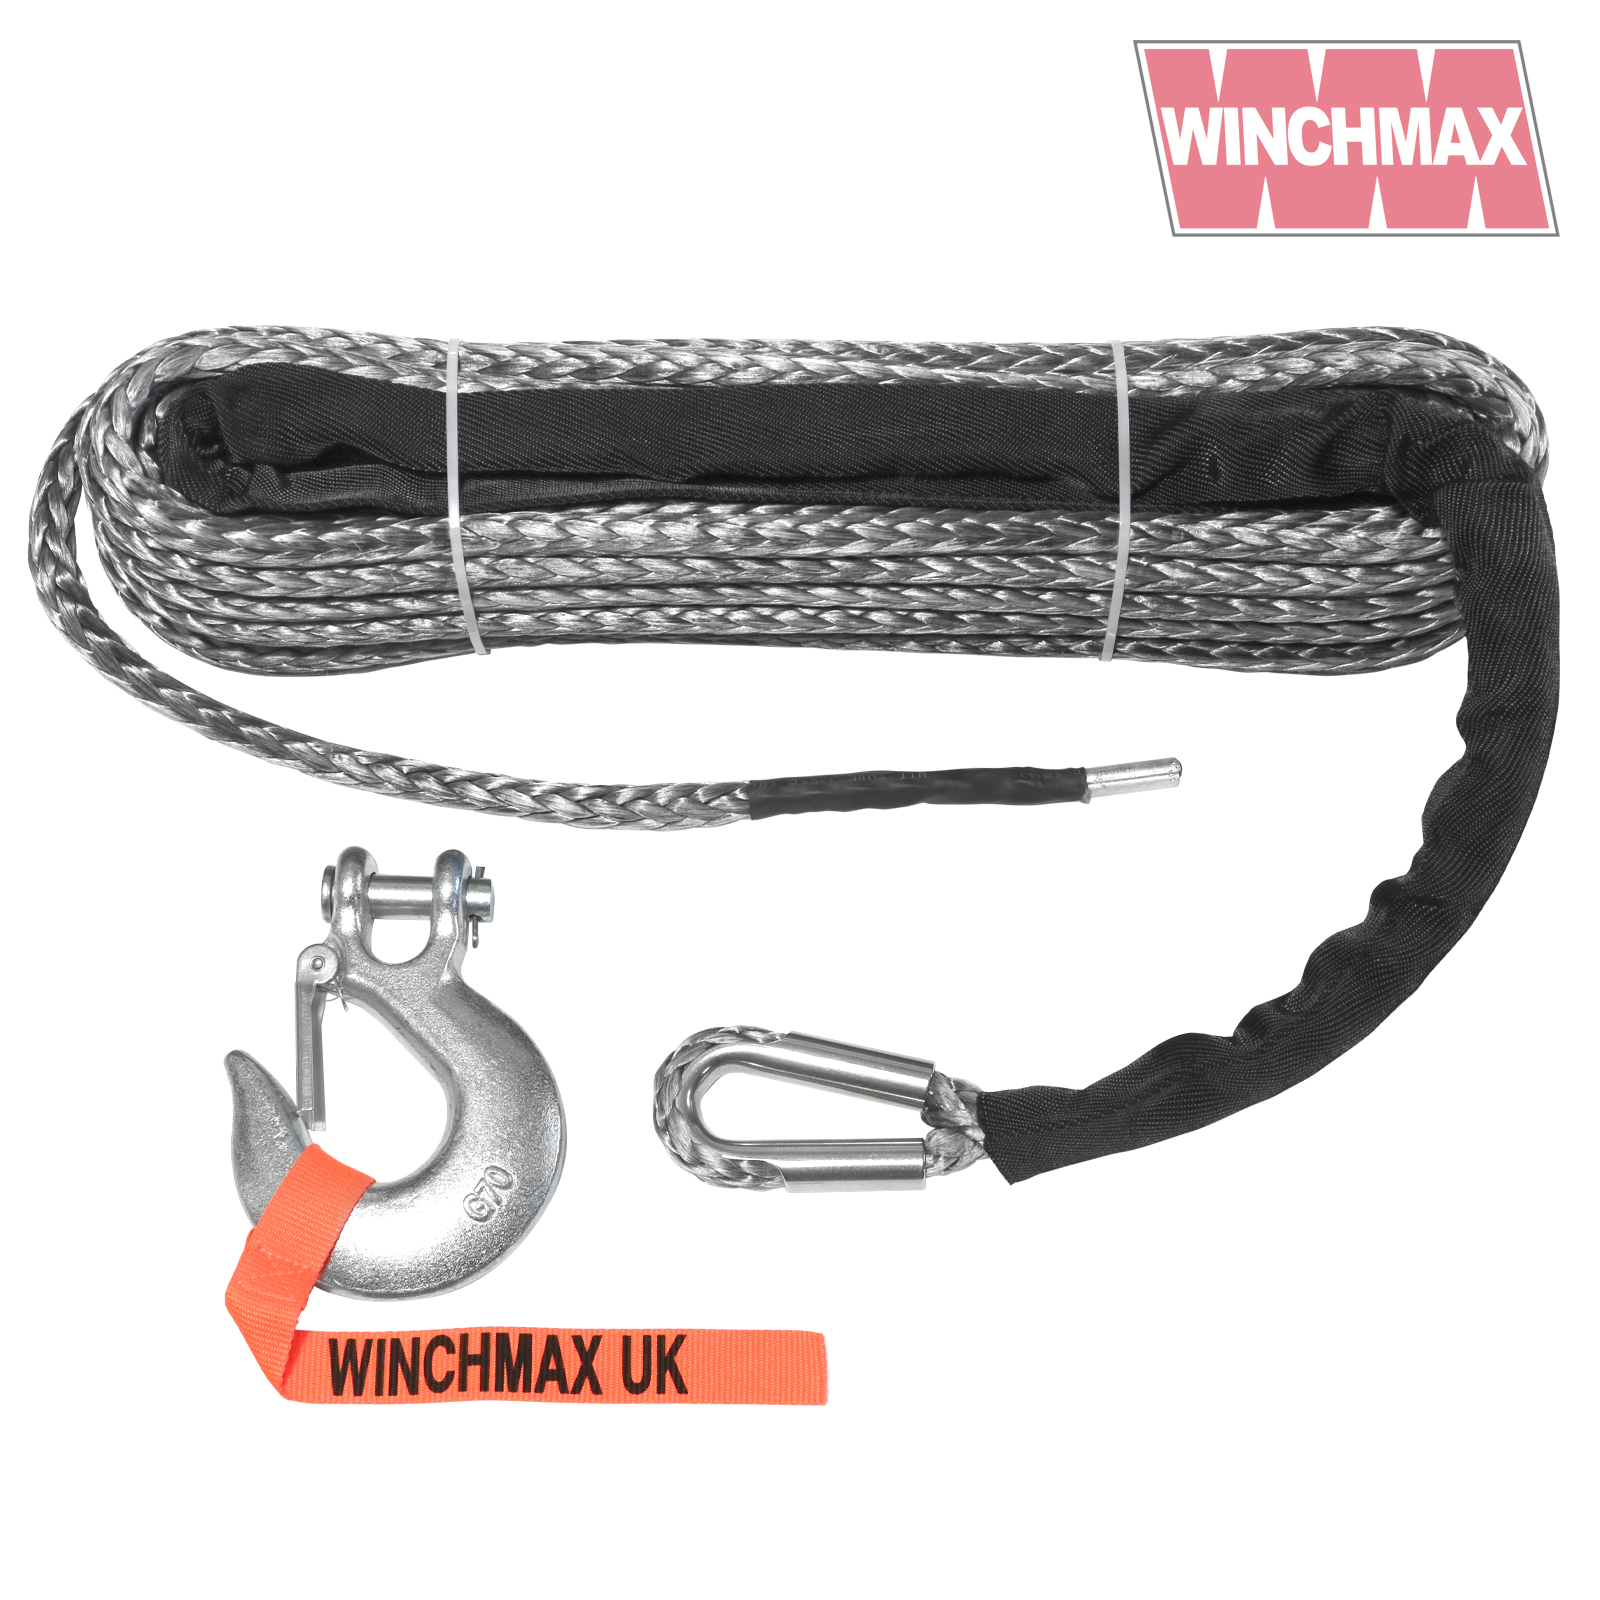 Premium Quality Synthetic Winch Rope 25m x 13mm, Hole Fix. 1/2 Inch Clevis  Hook. - Winchmax